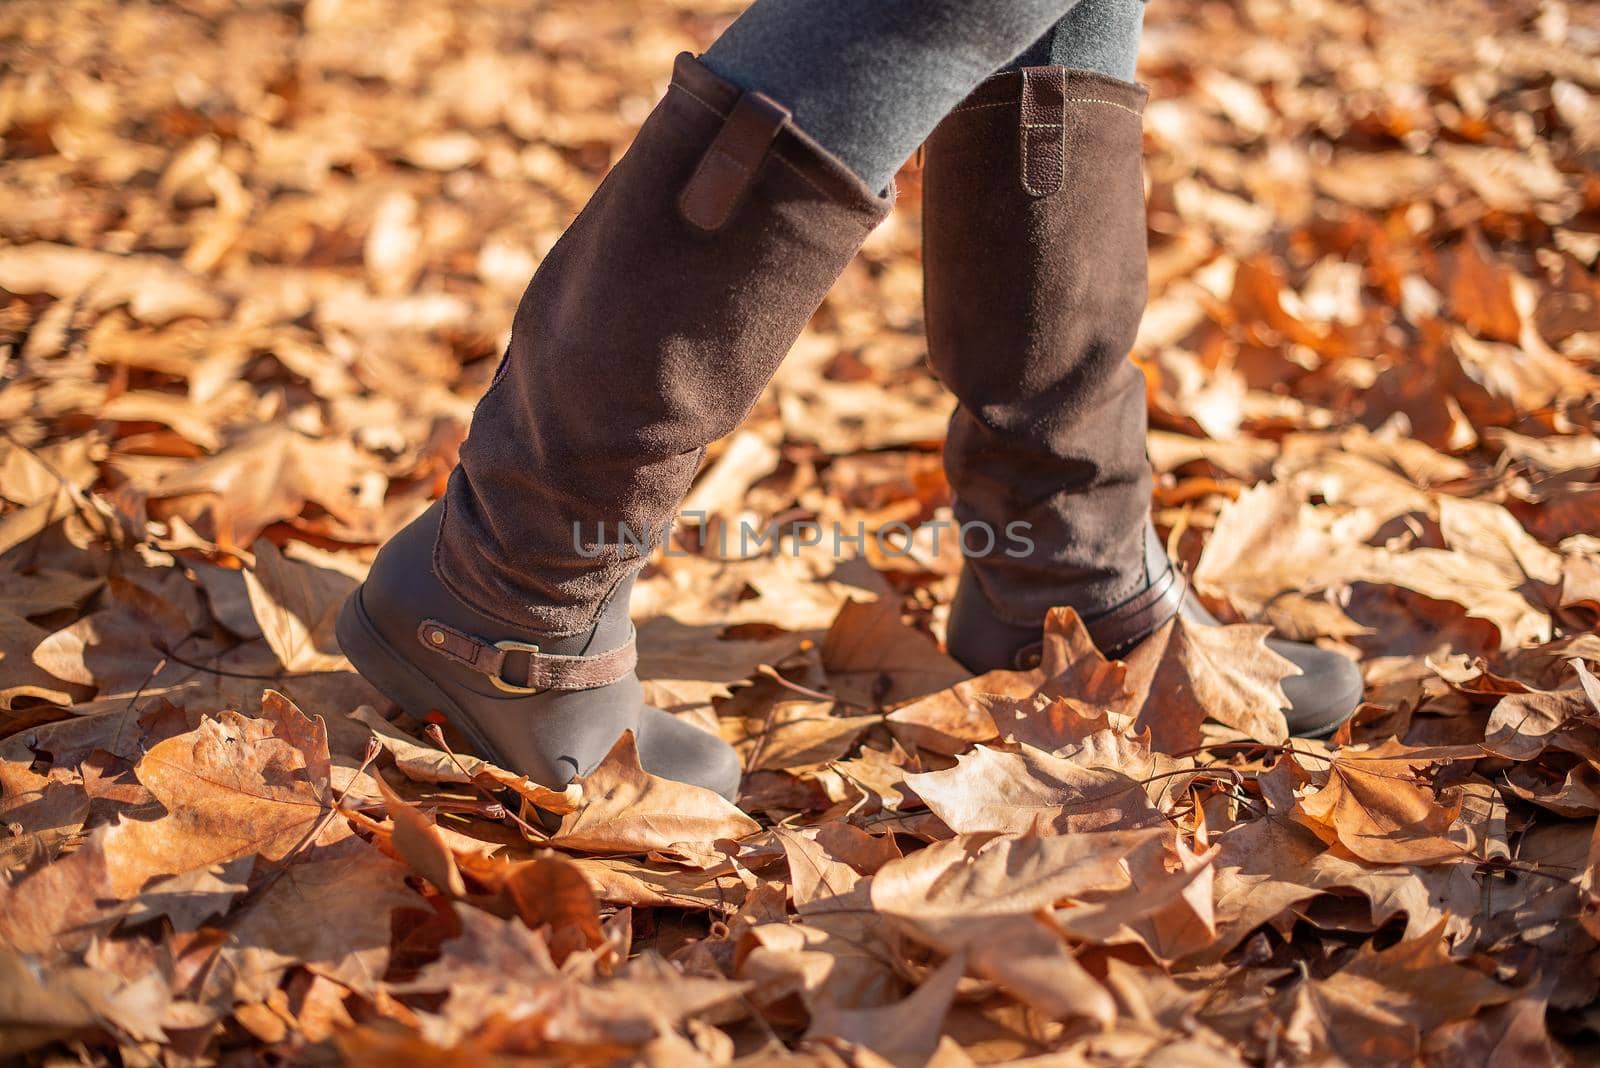 Boots of a woman walking through fallen leaves in autumn by ivanmoreno